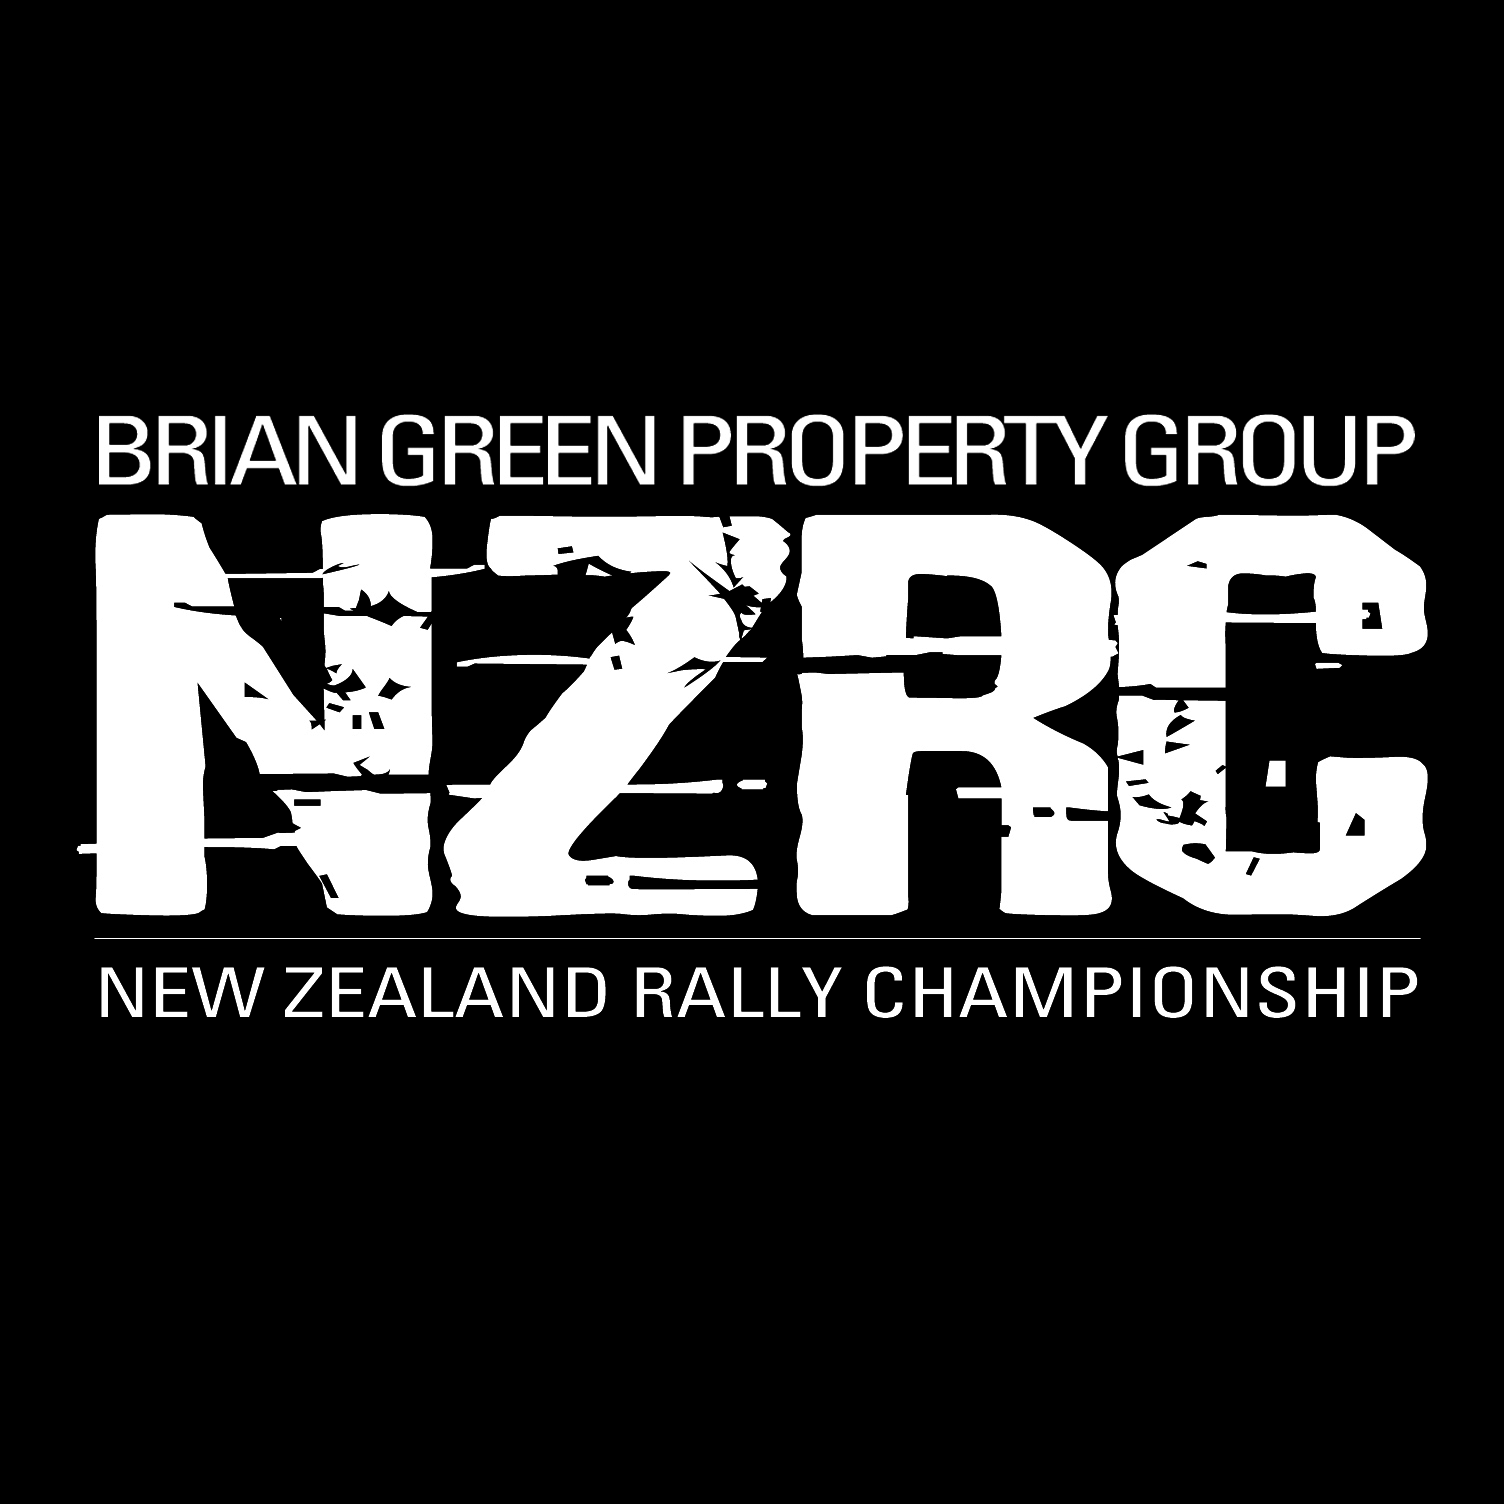 From the Service Park – City of Auckland Rally/Battle of Jacks Ridge | :: Brian Green Property Group New Zealand Rally Championship ::